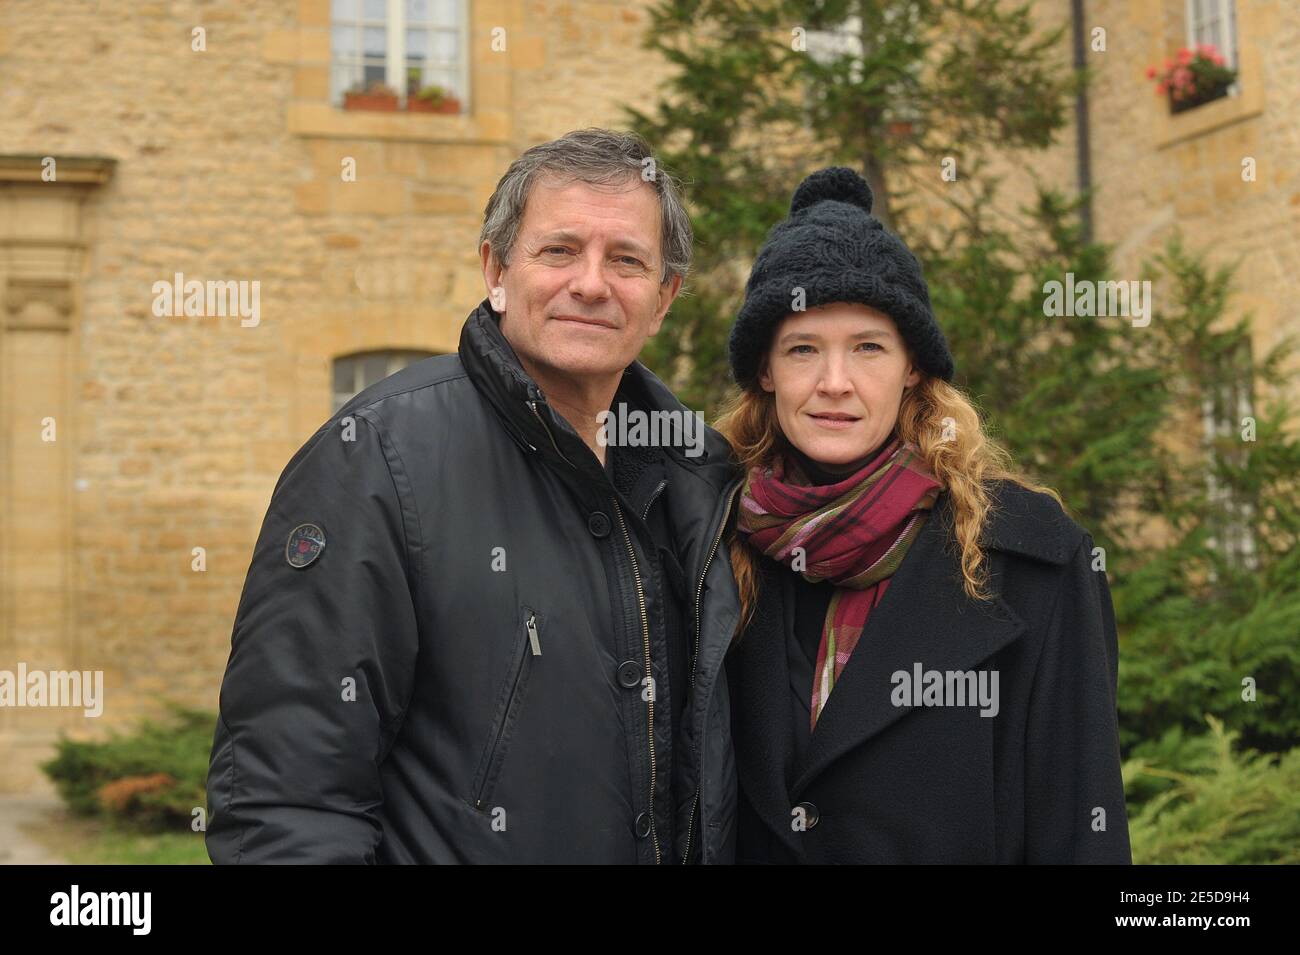 French director Francis Huster and Julika Jenkins present their upcoming movie 'L'homme et son chien' during the Sarlat Film Festival 2008 in Sarlat, south west of France, on November 14, 2008. Photo by Giancarlo Gorassini/ABACAPRESS.COM Stock Photo